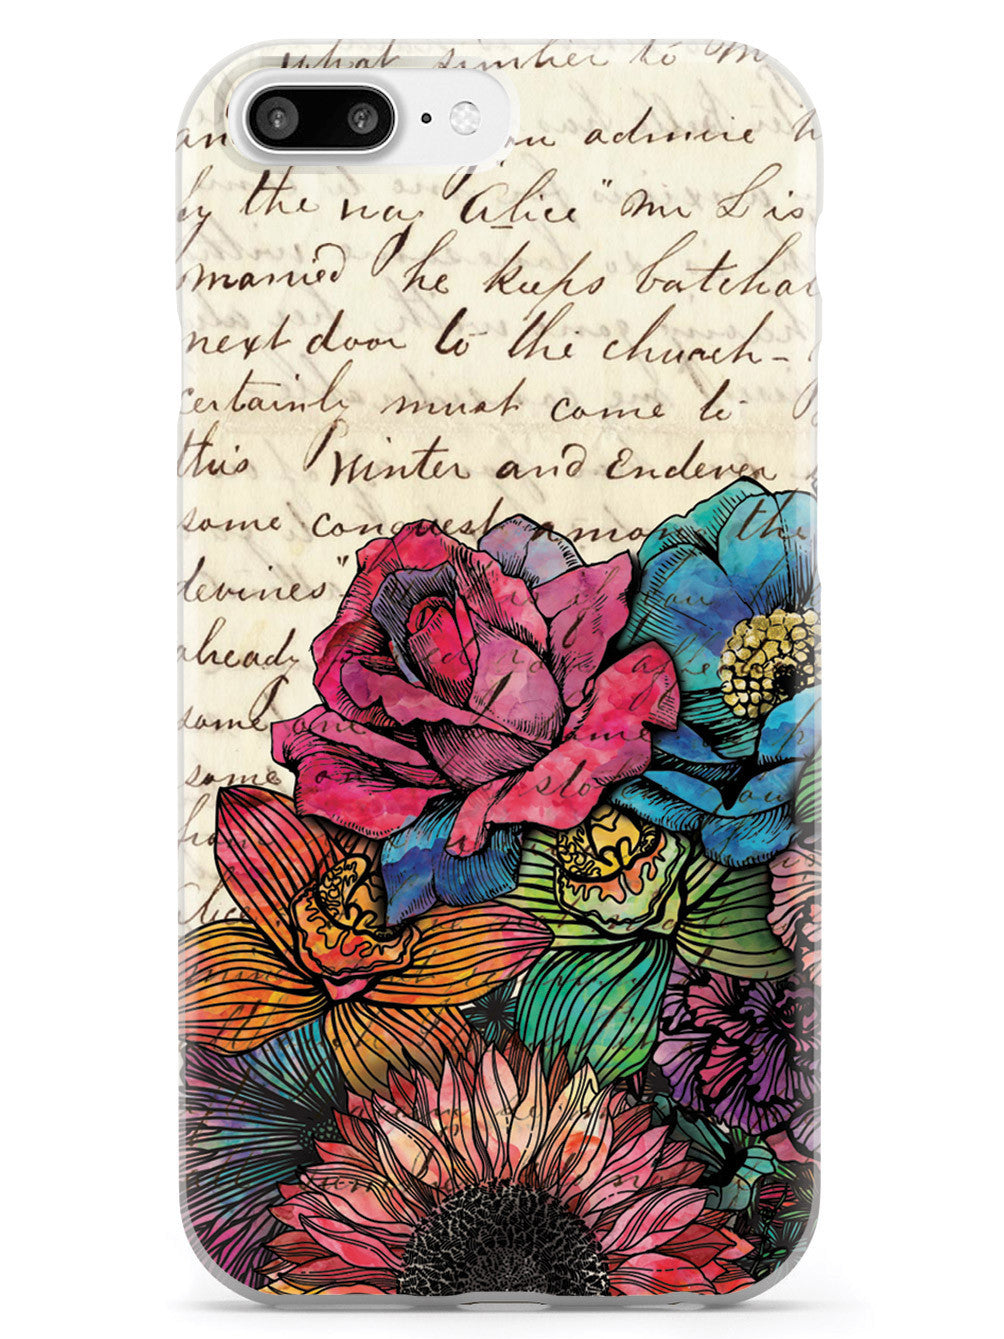 Vintage Handwritten Letter and Flowers Case